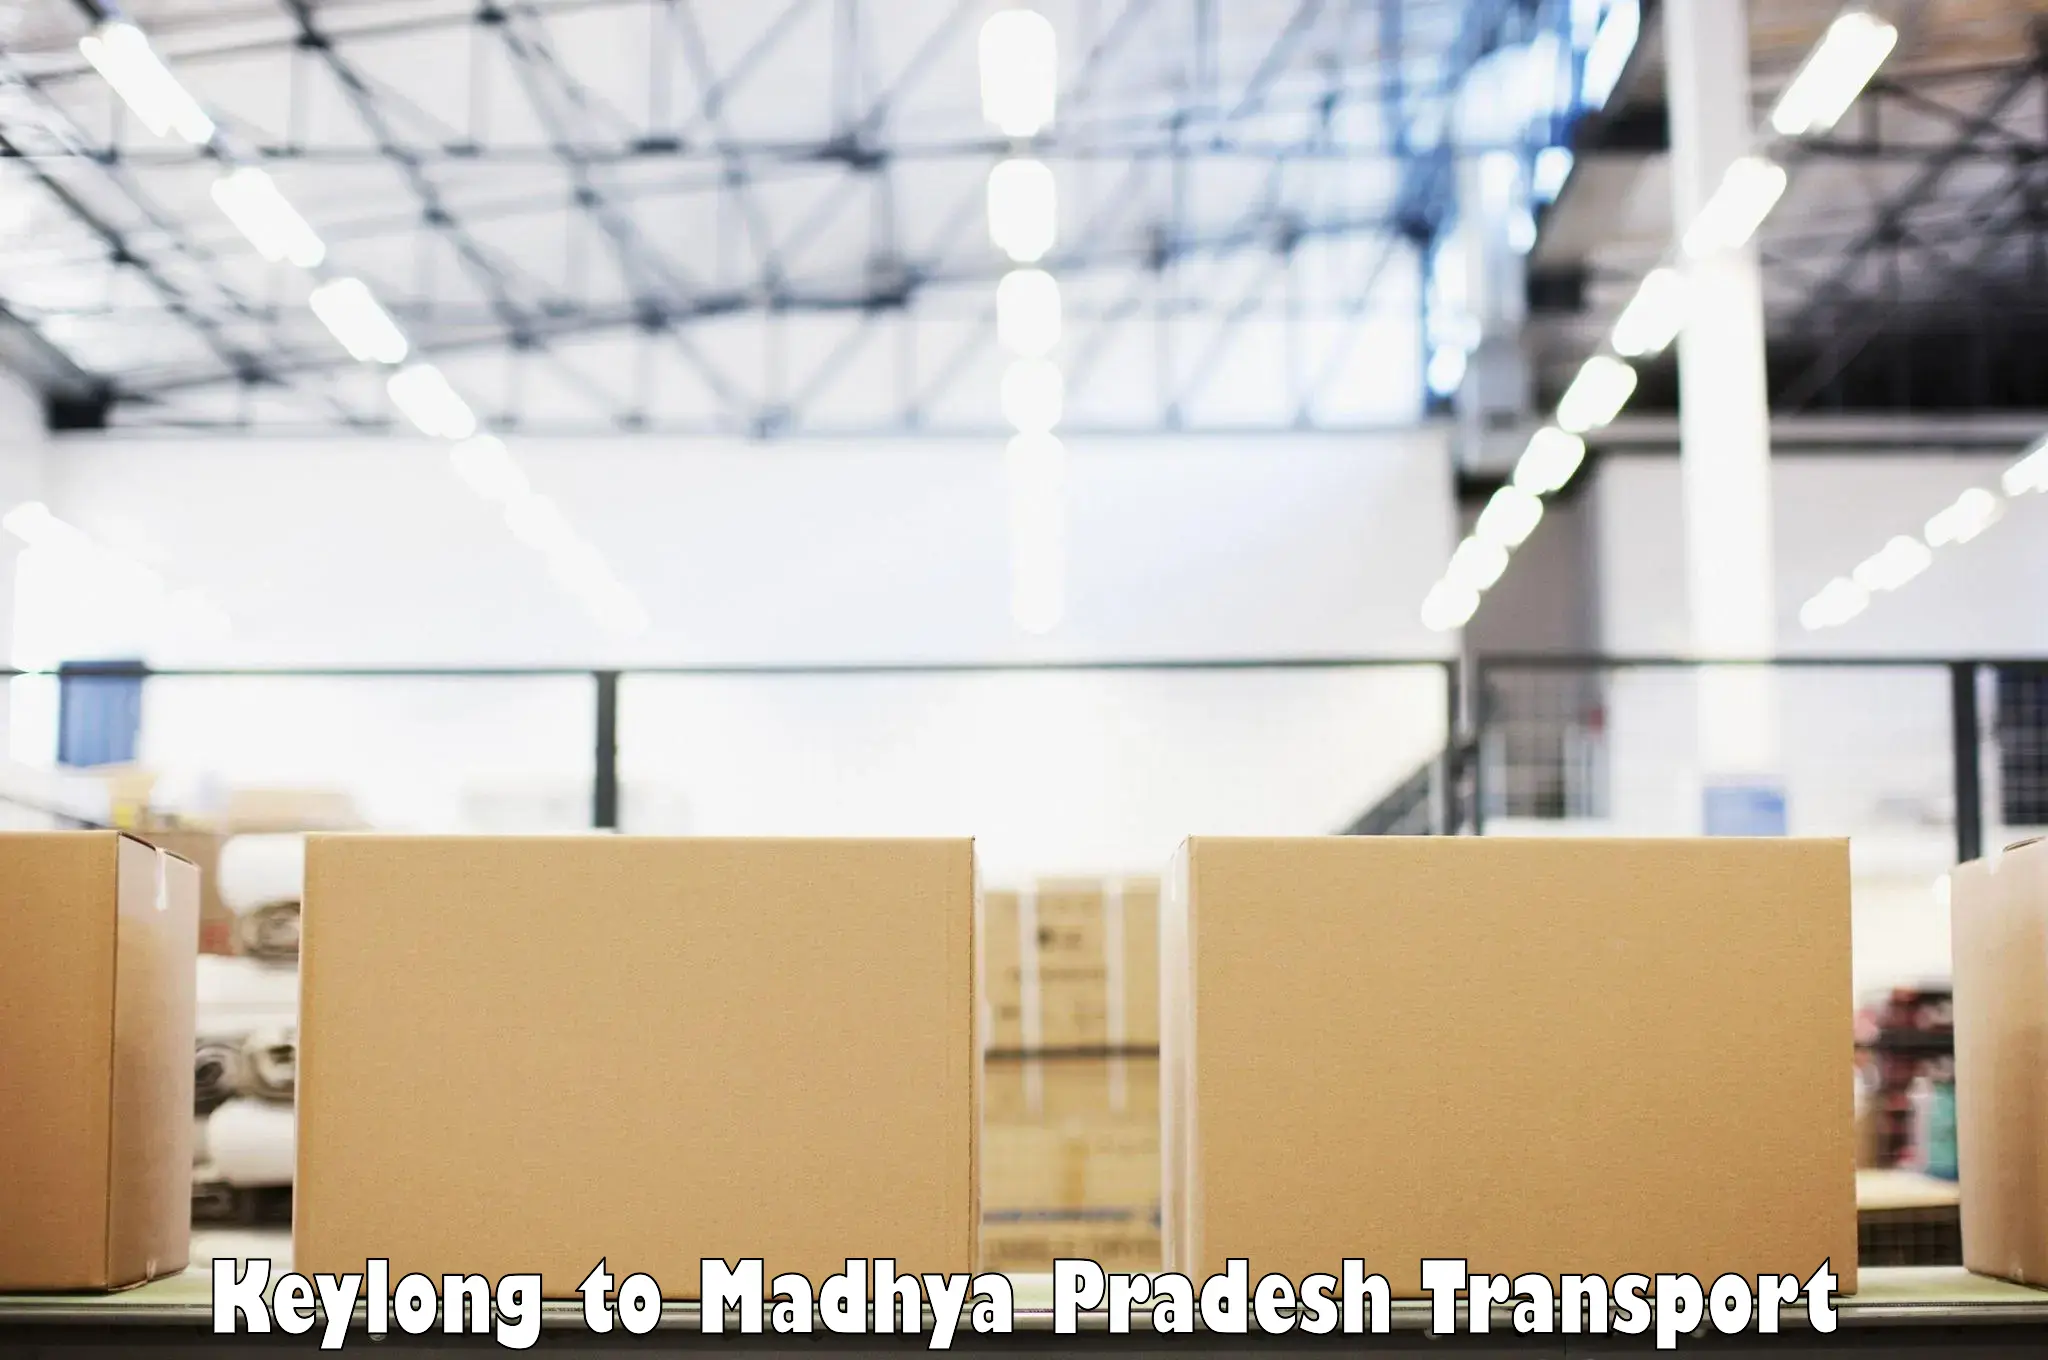 Truck transport companies in India Keylong to Deosar